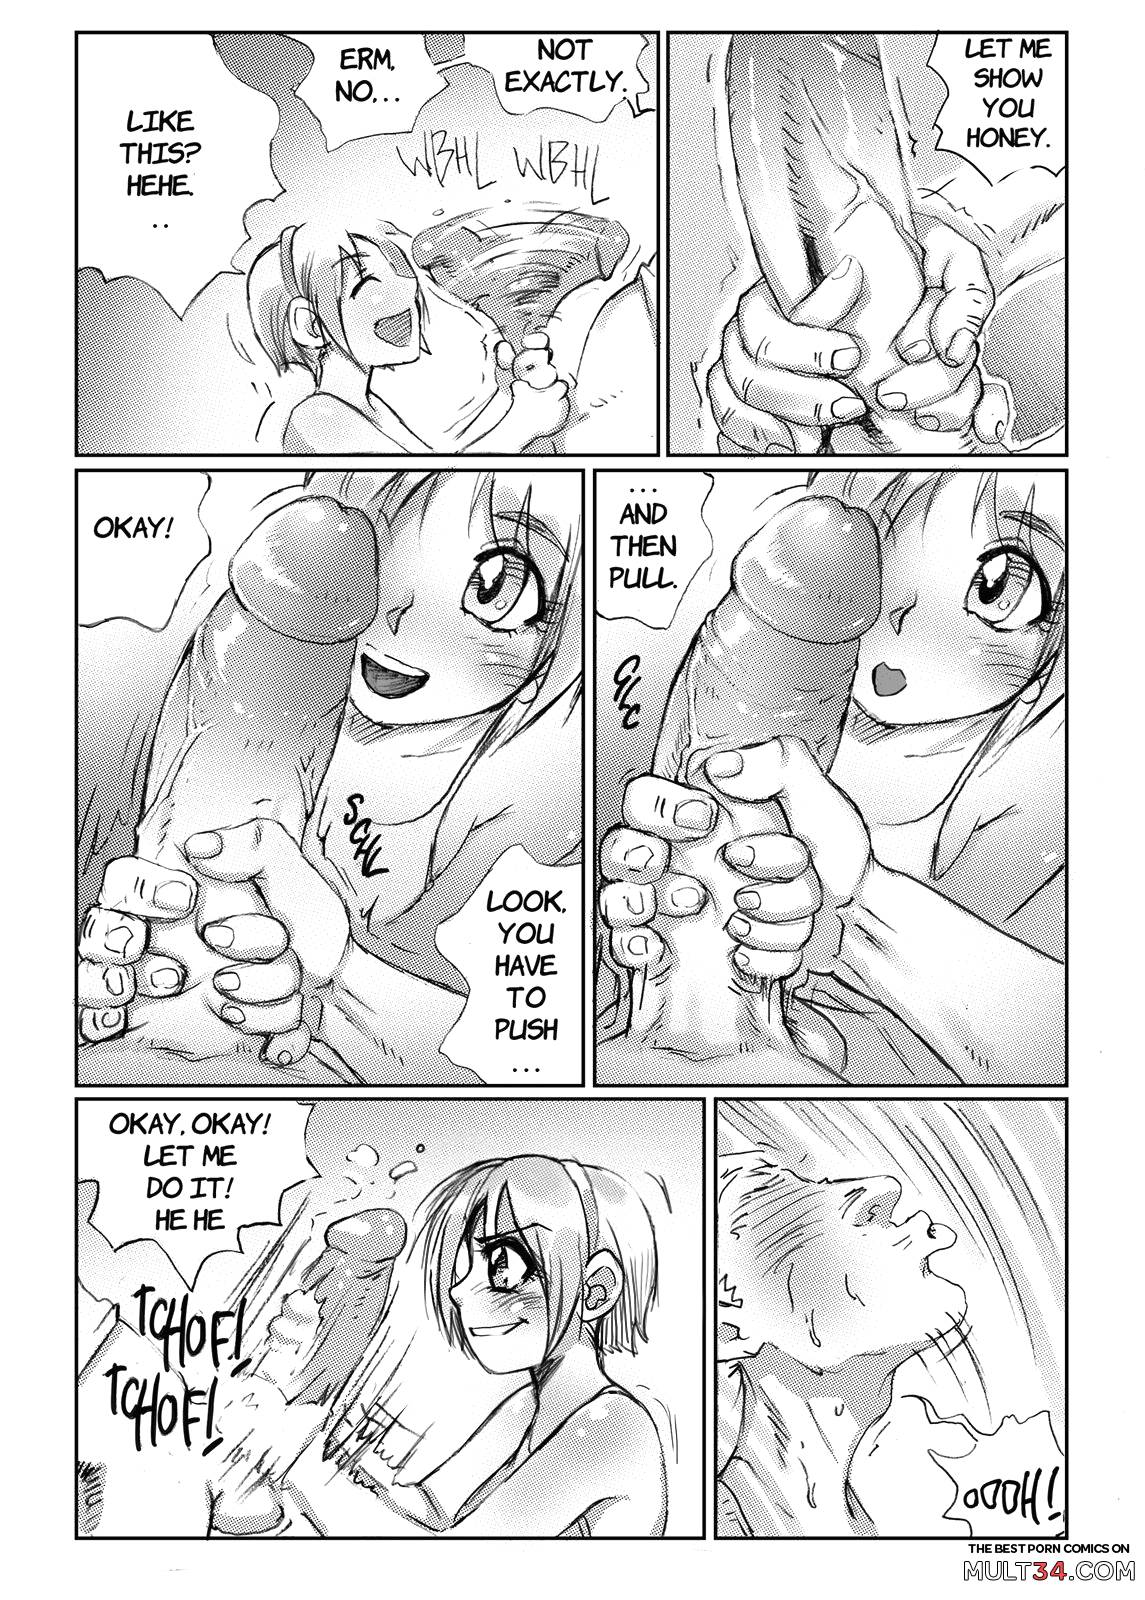 Sidney - Part 1 page 7